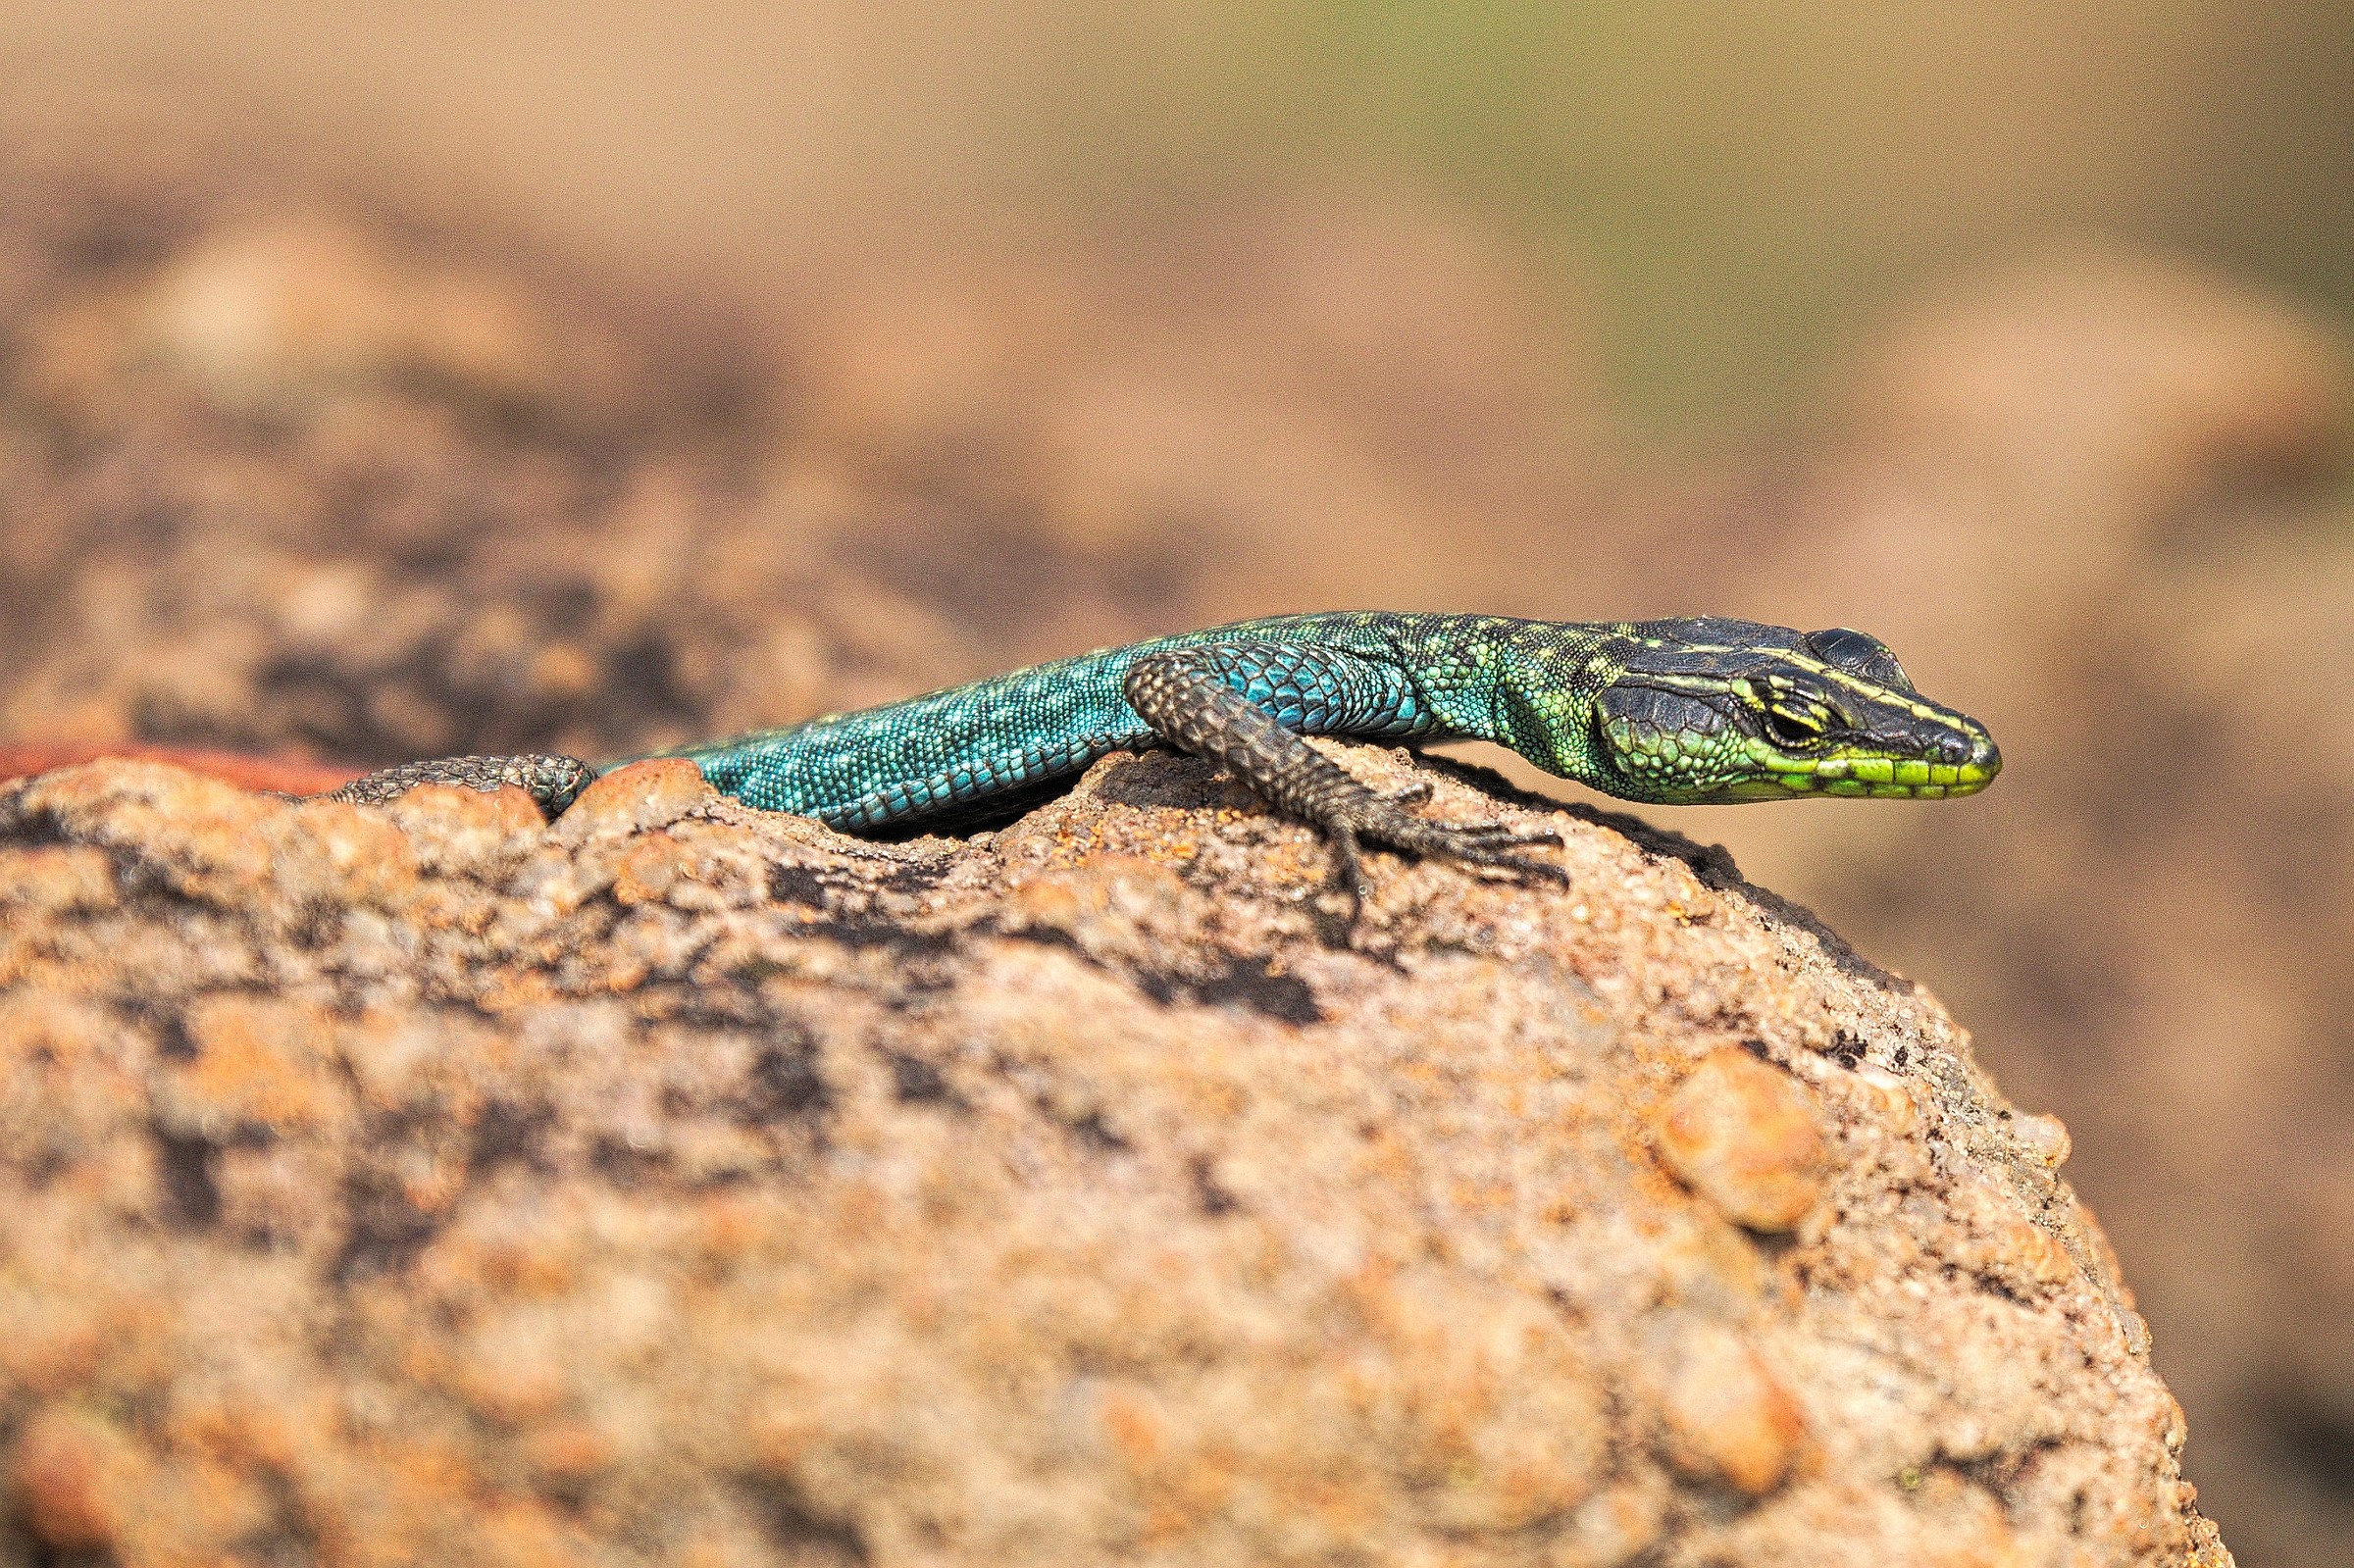 Lizard with beautiful colors...